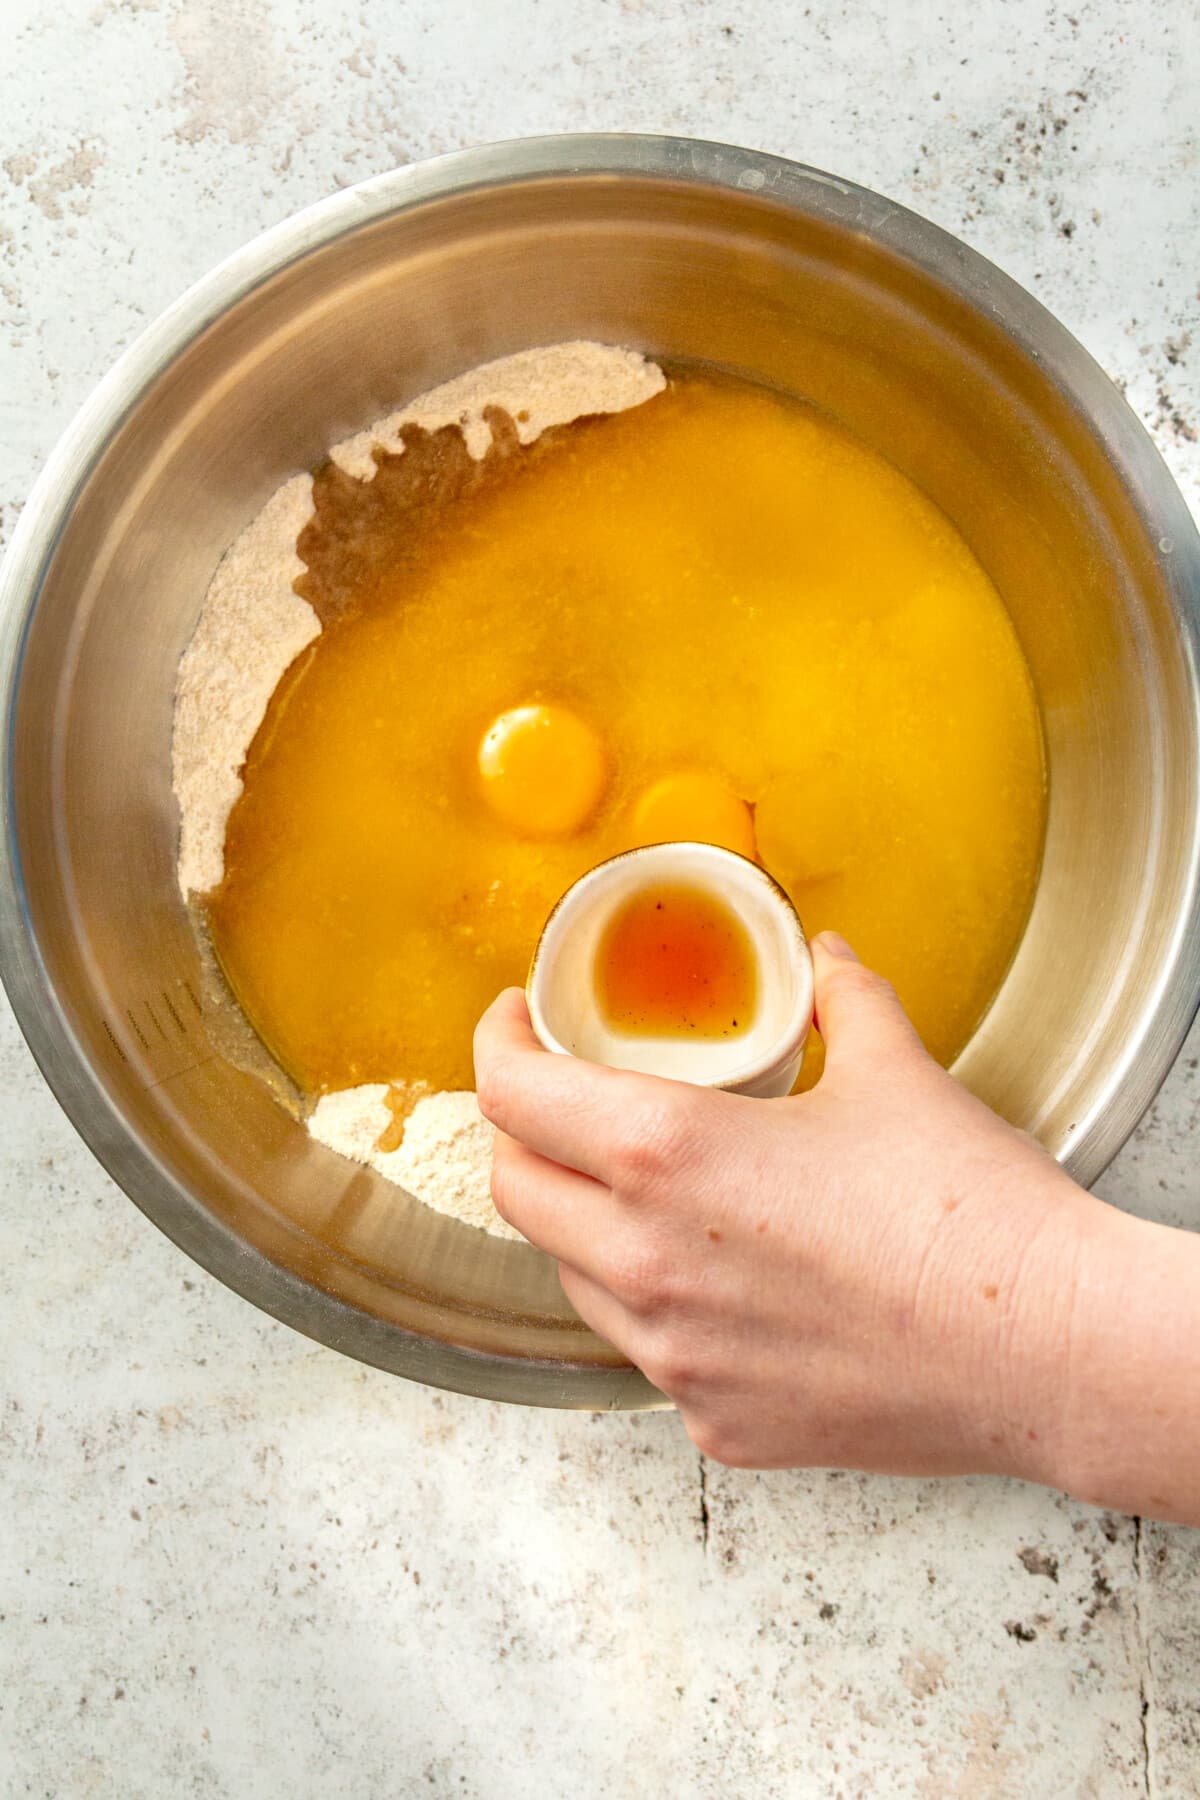 Vanilla extract is shown being added to a large metal mixing bowl which holds eggs and several other ingredients.